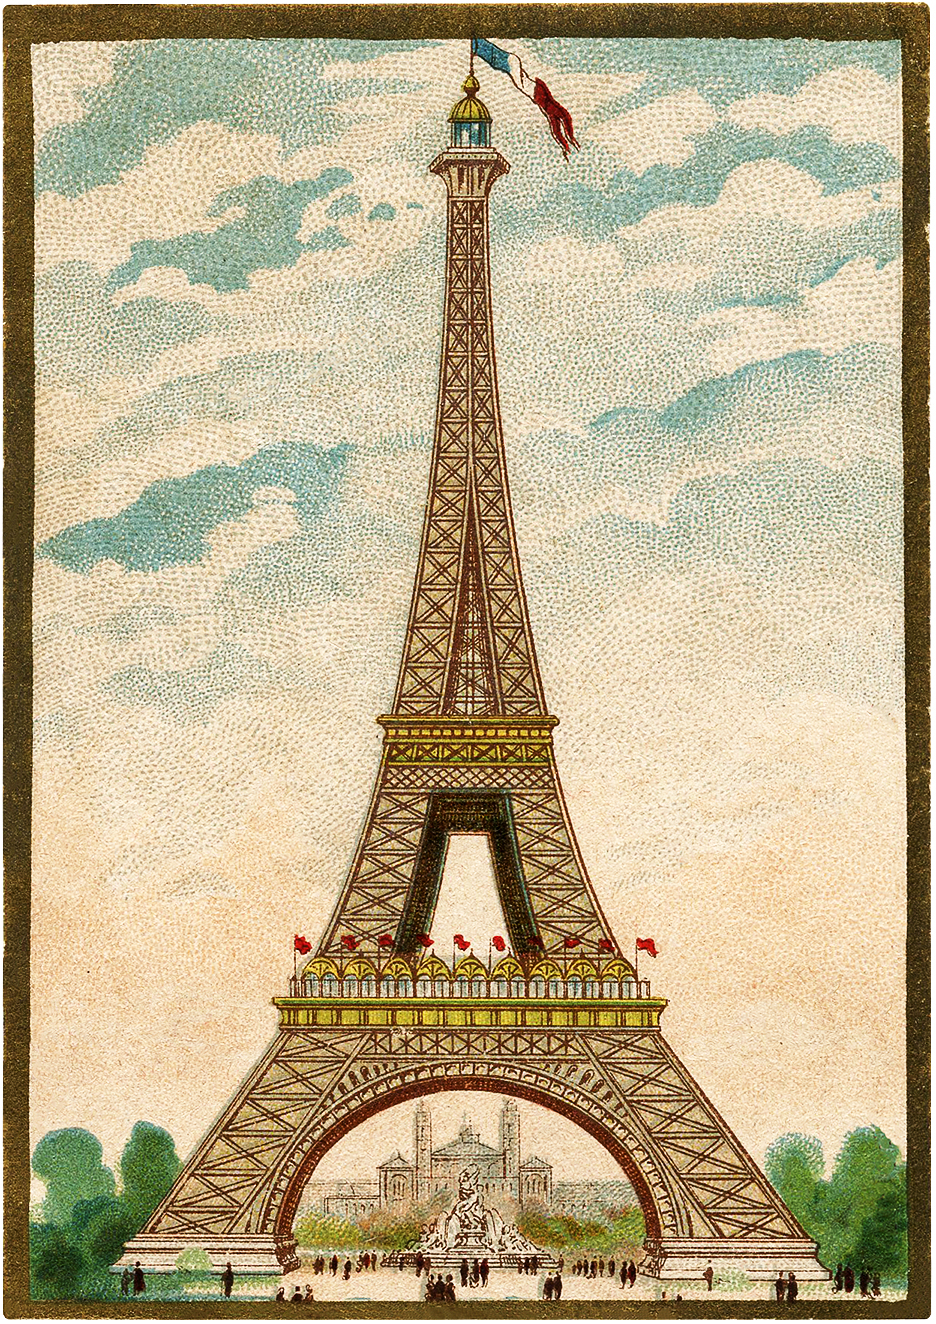 Fantastic Colorful Vintage Eiffel Tower Image! - The Graphics Fairy